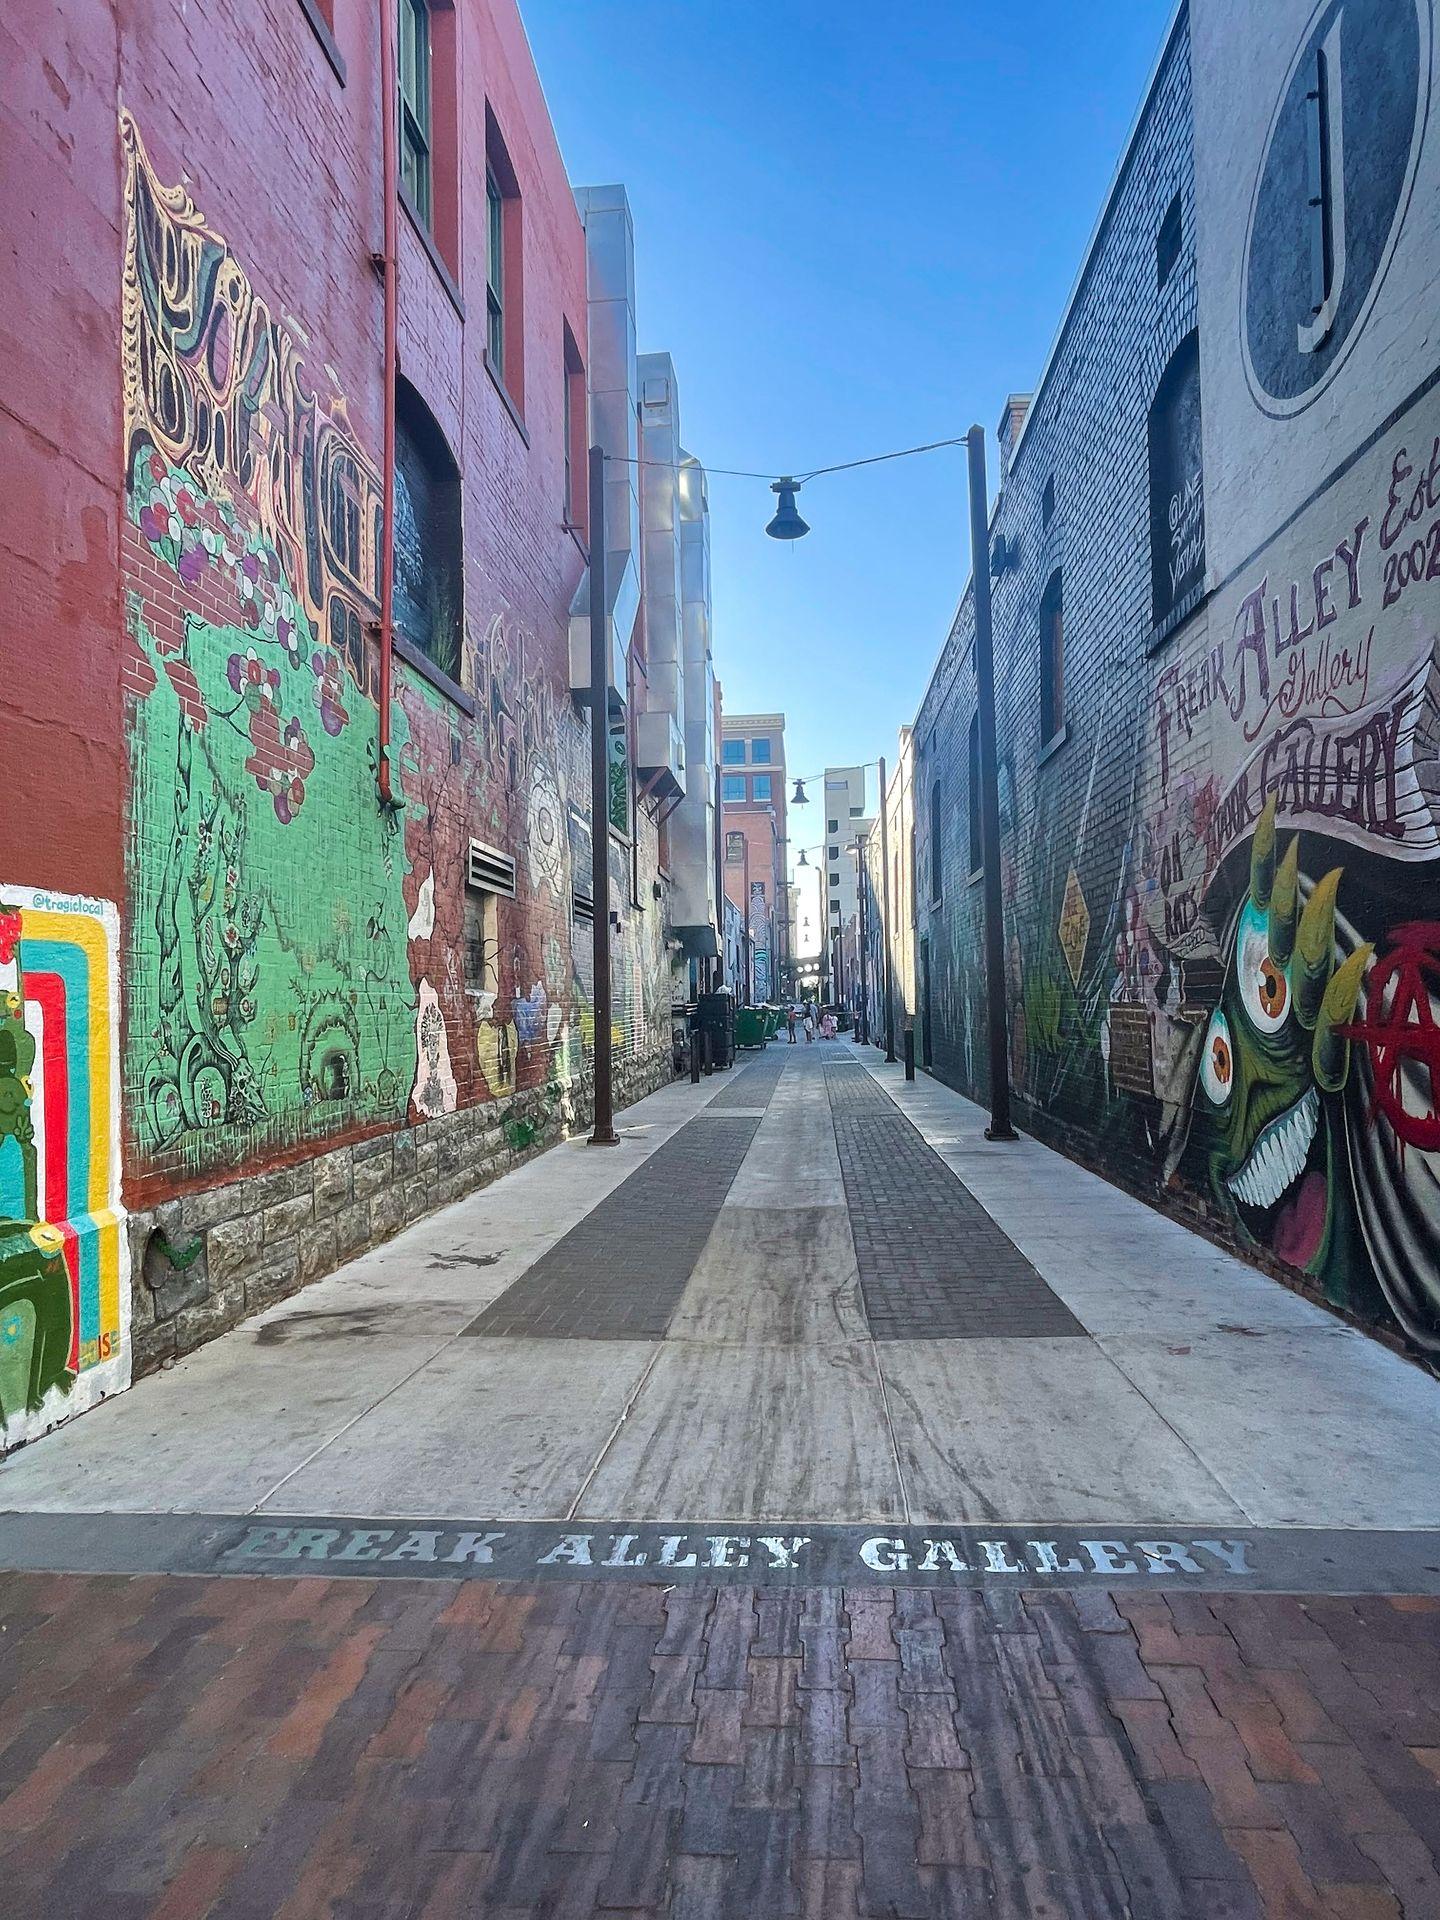 Looking down the Freak Alley gallery with paintings on both sides.